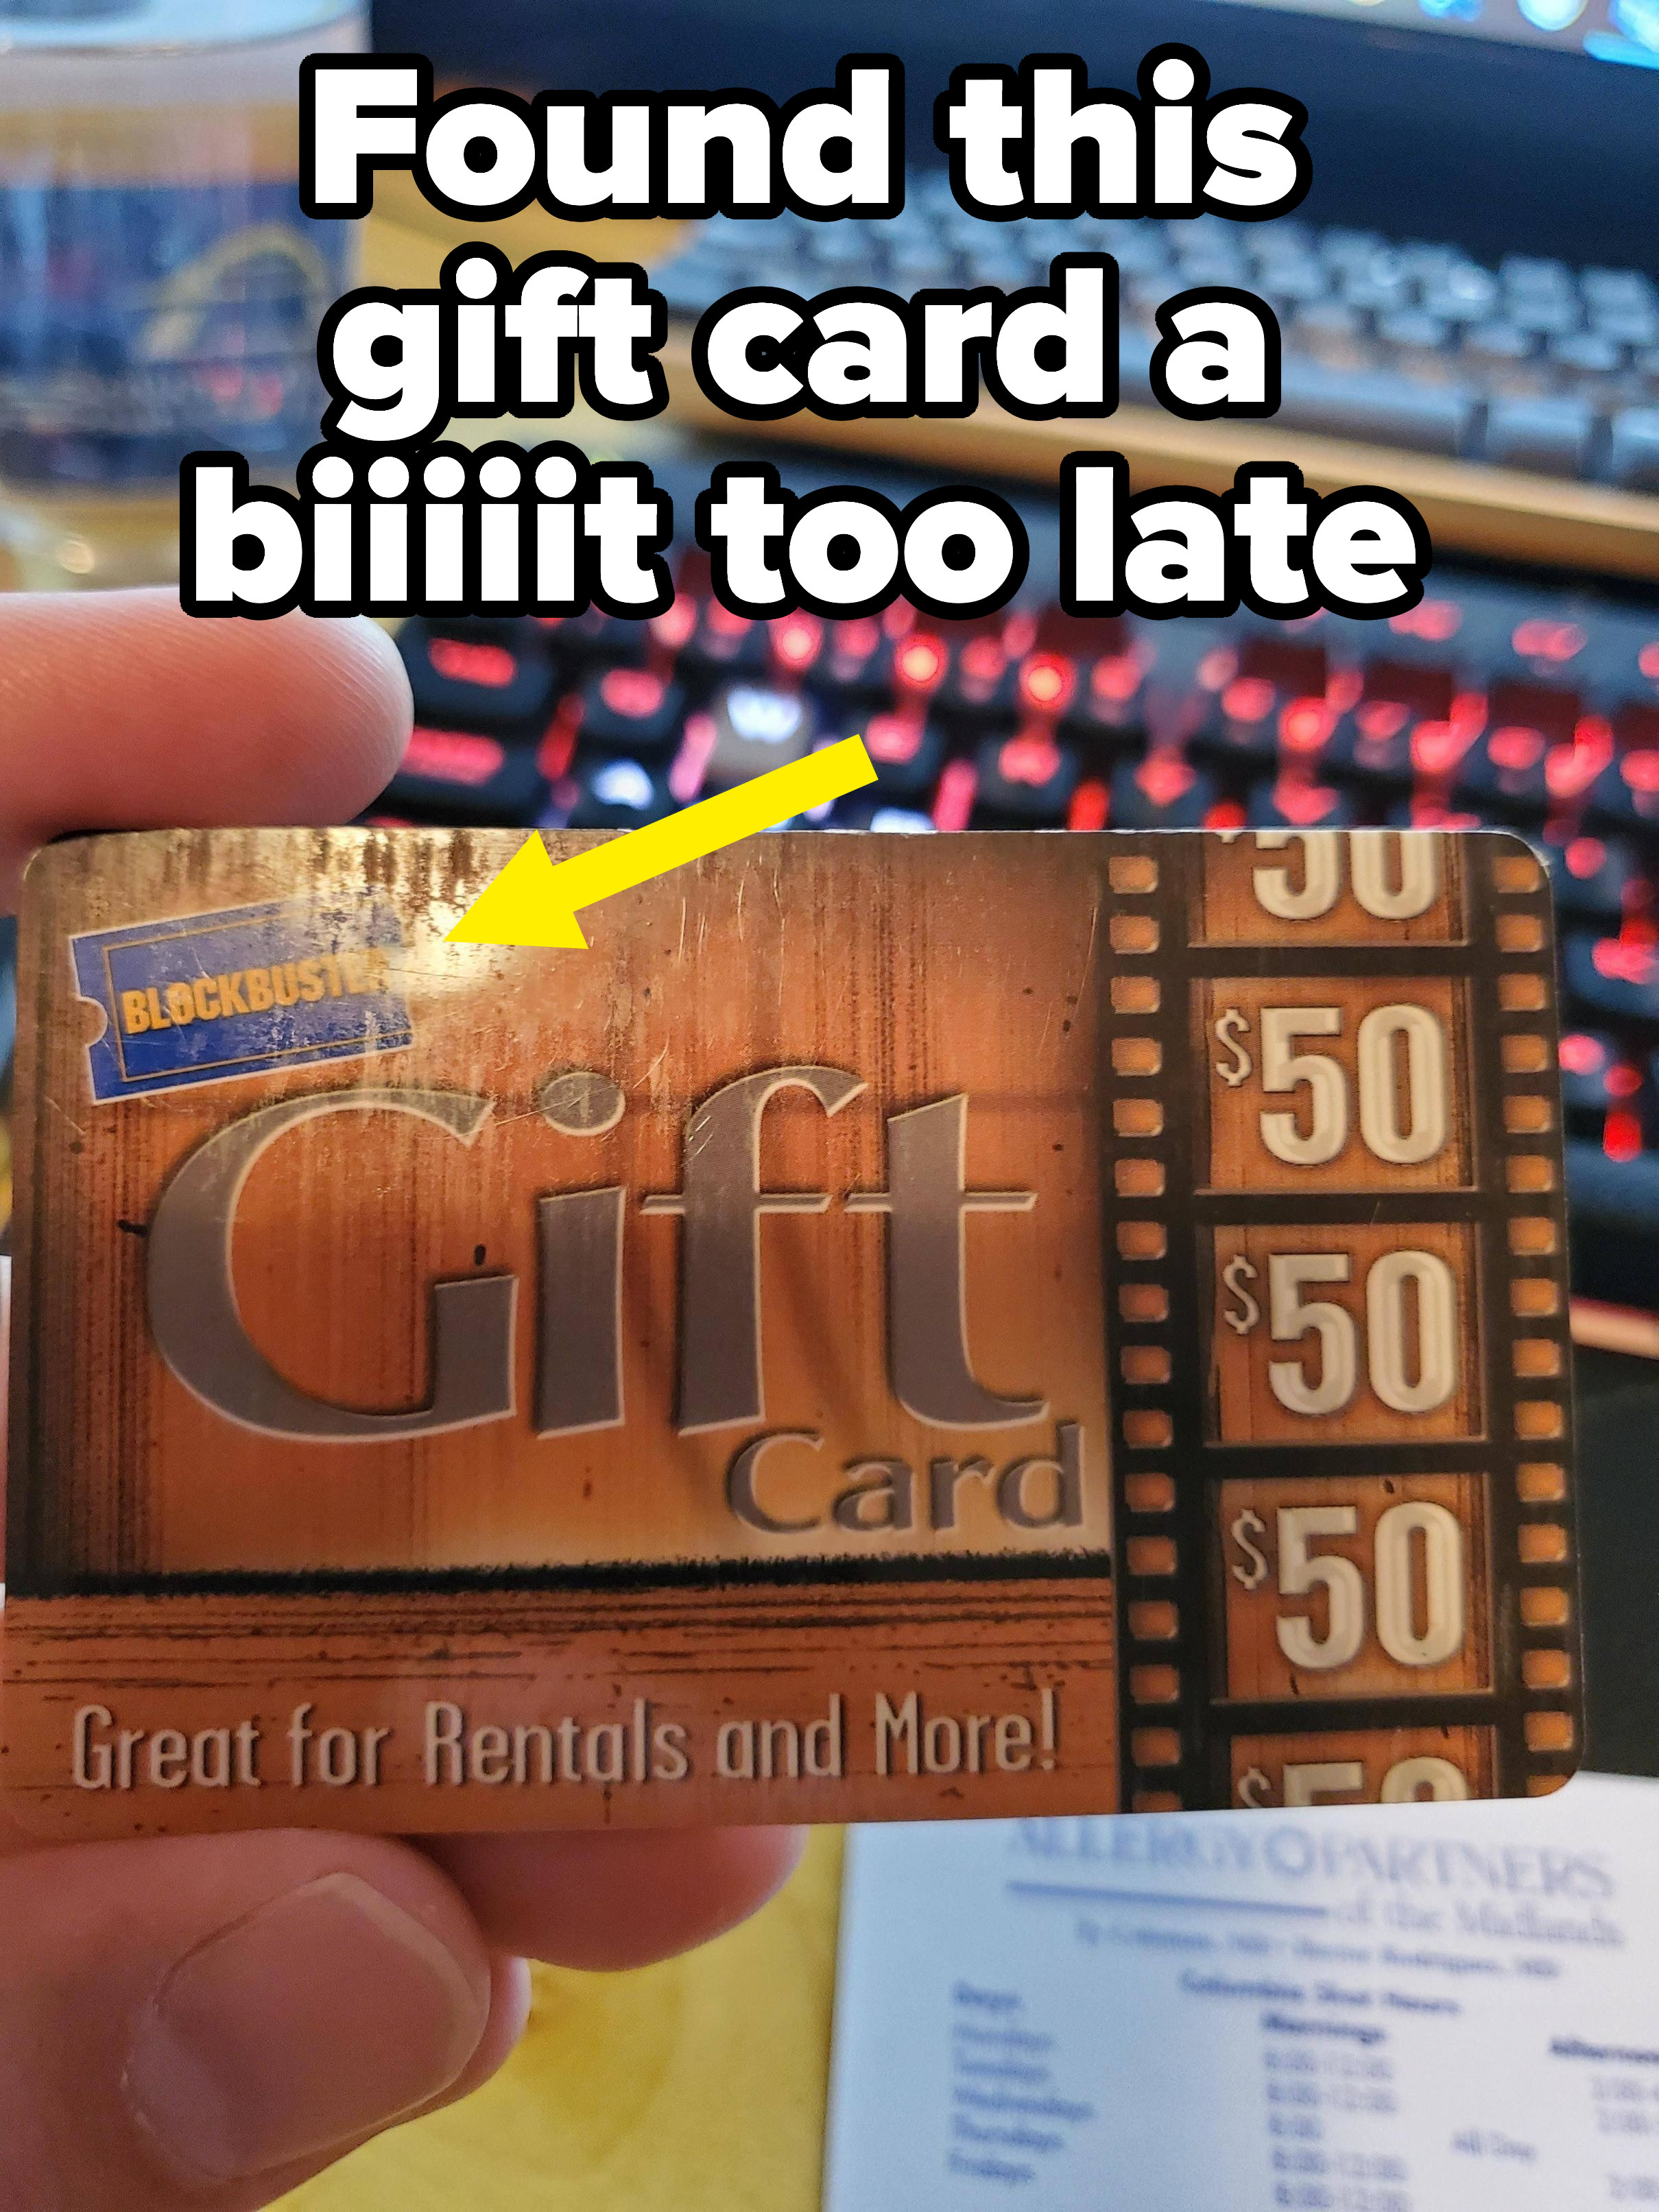 A Blockbuster gift card